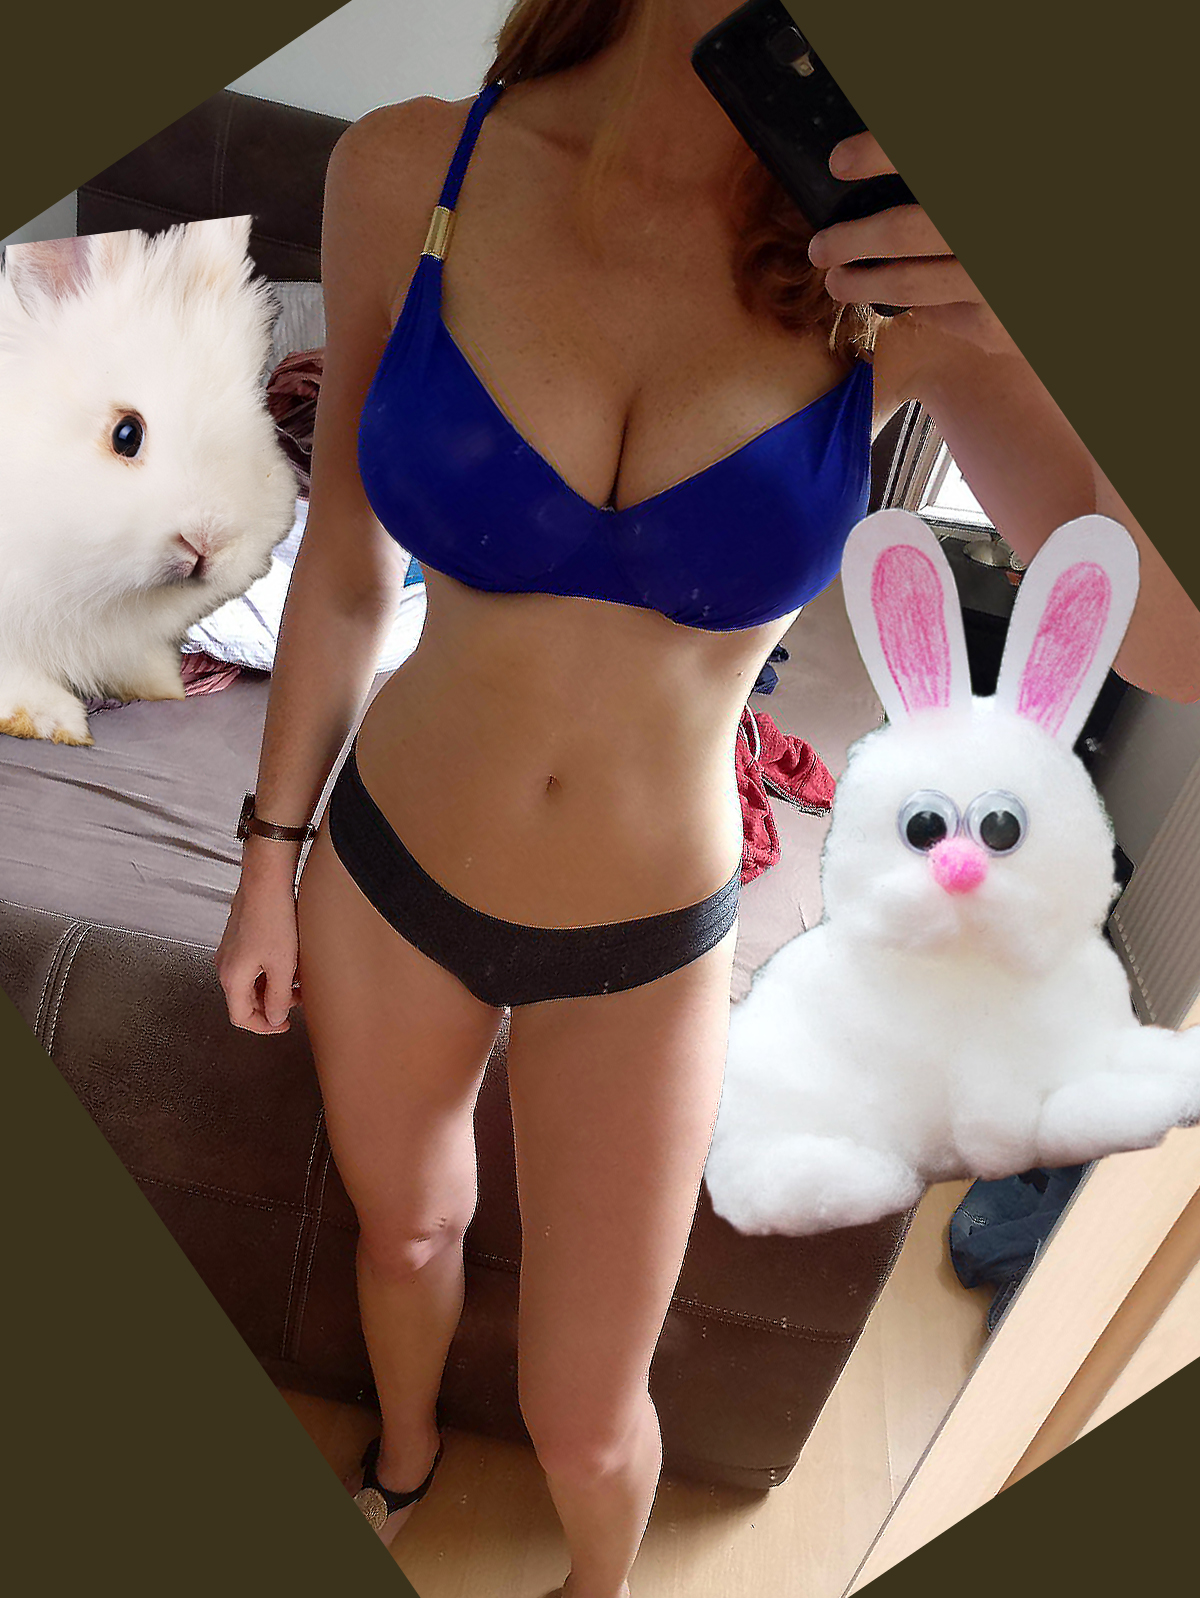 Would i be a good playboy bunny?